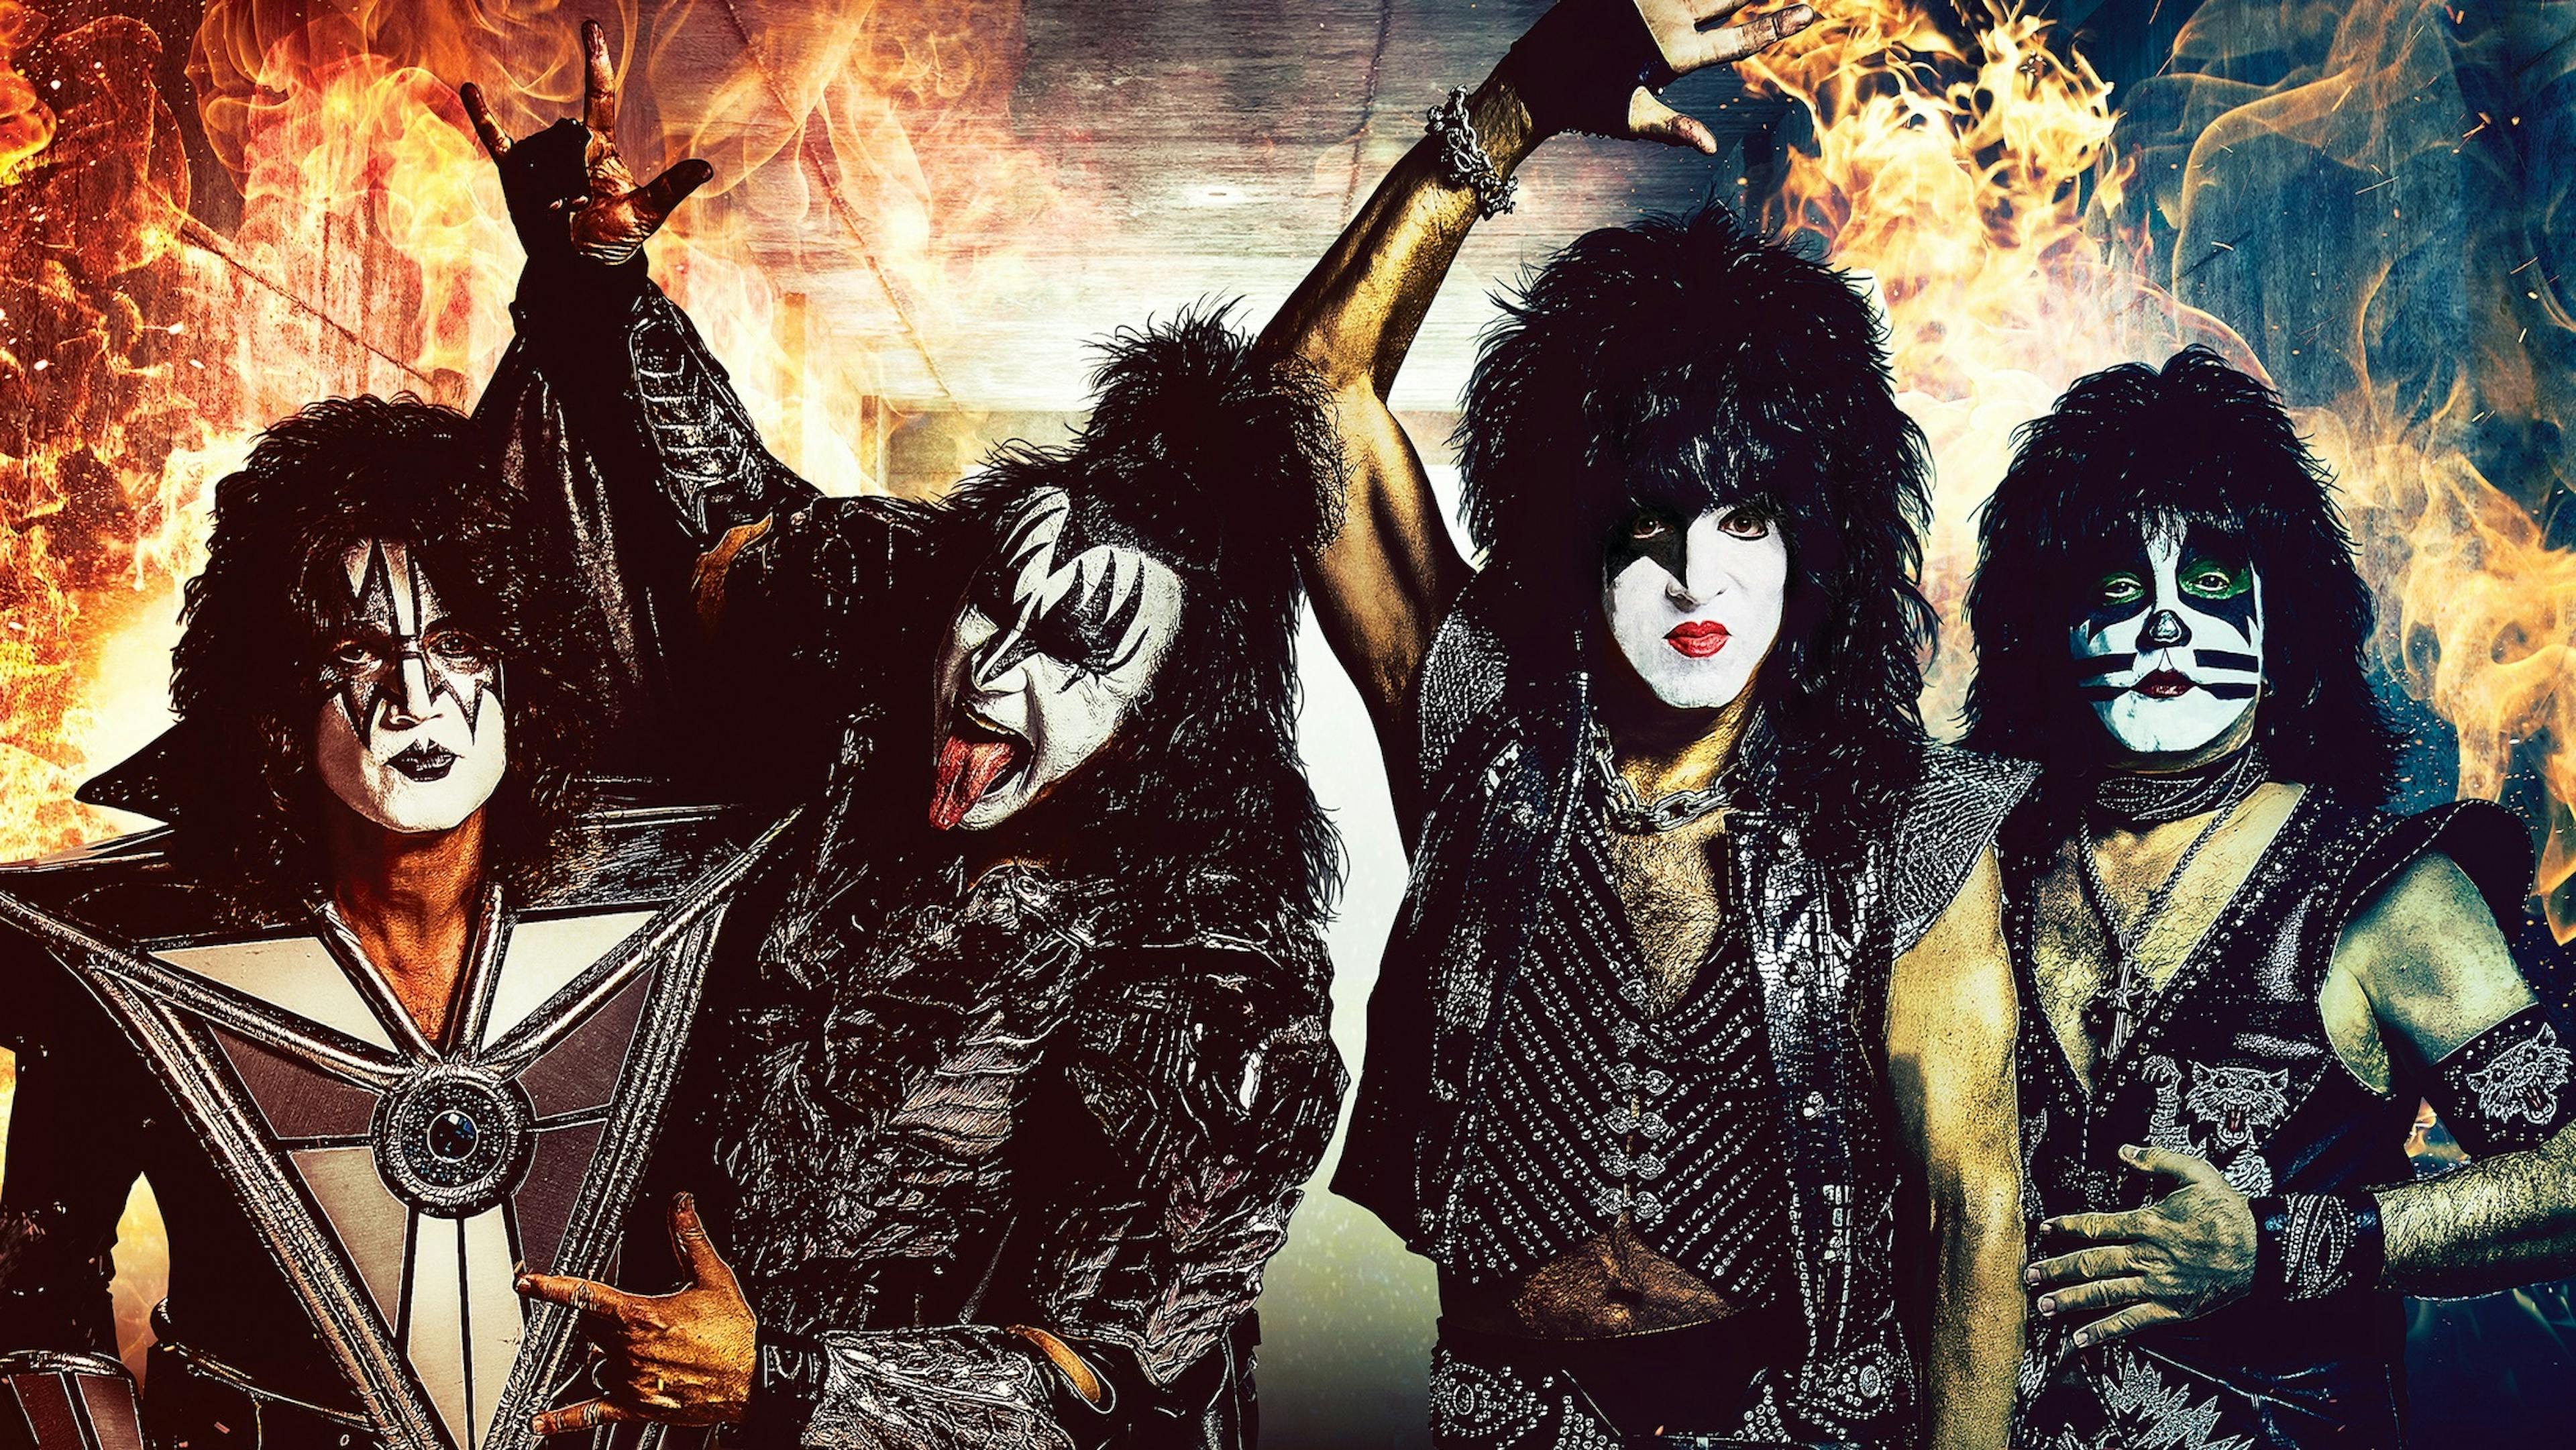 There's A New Pokémon That Looks Just Like KISS' Gene Simmons